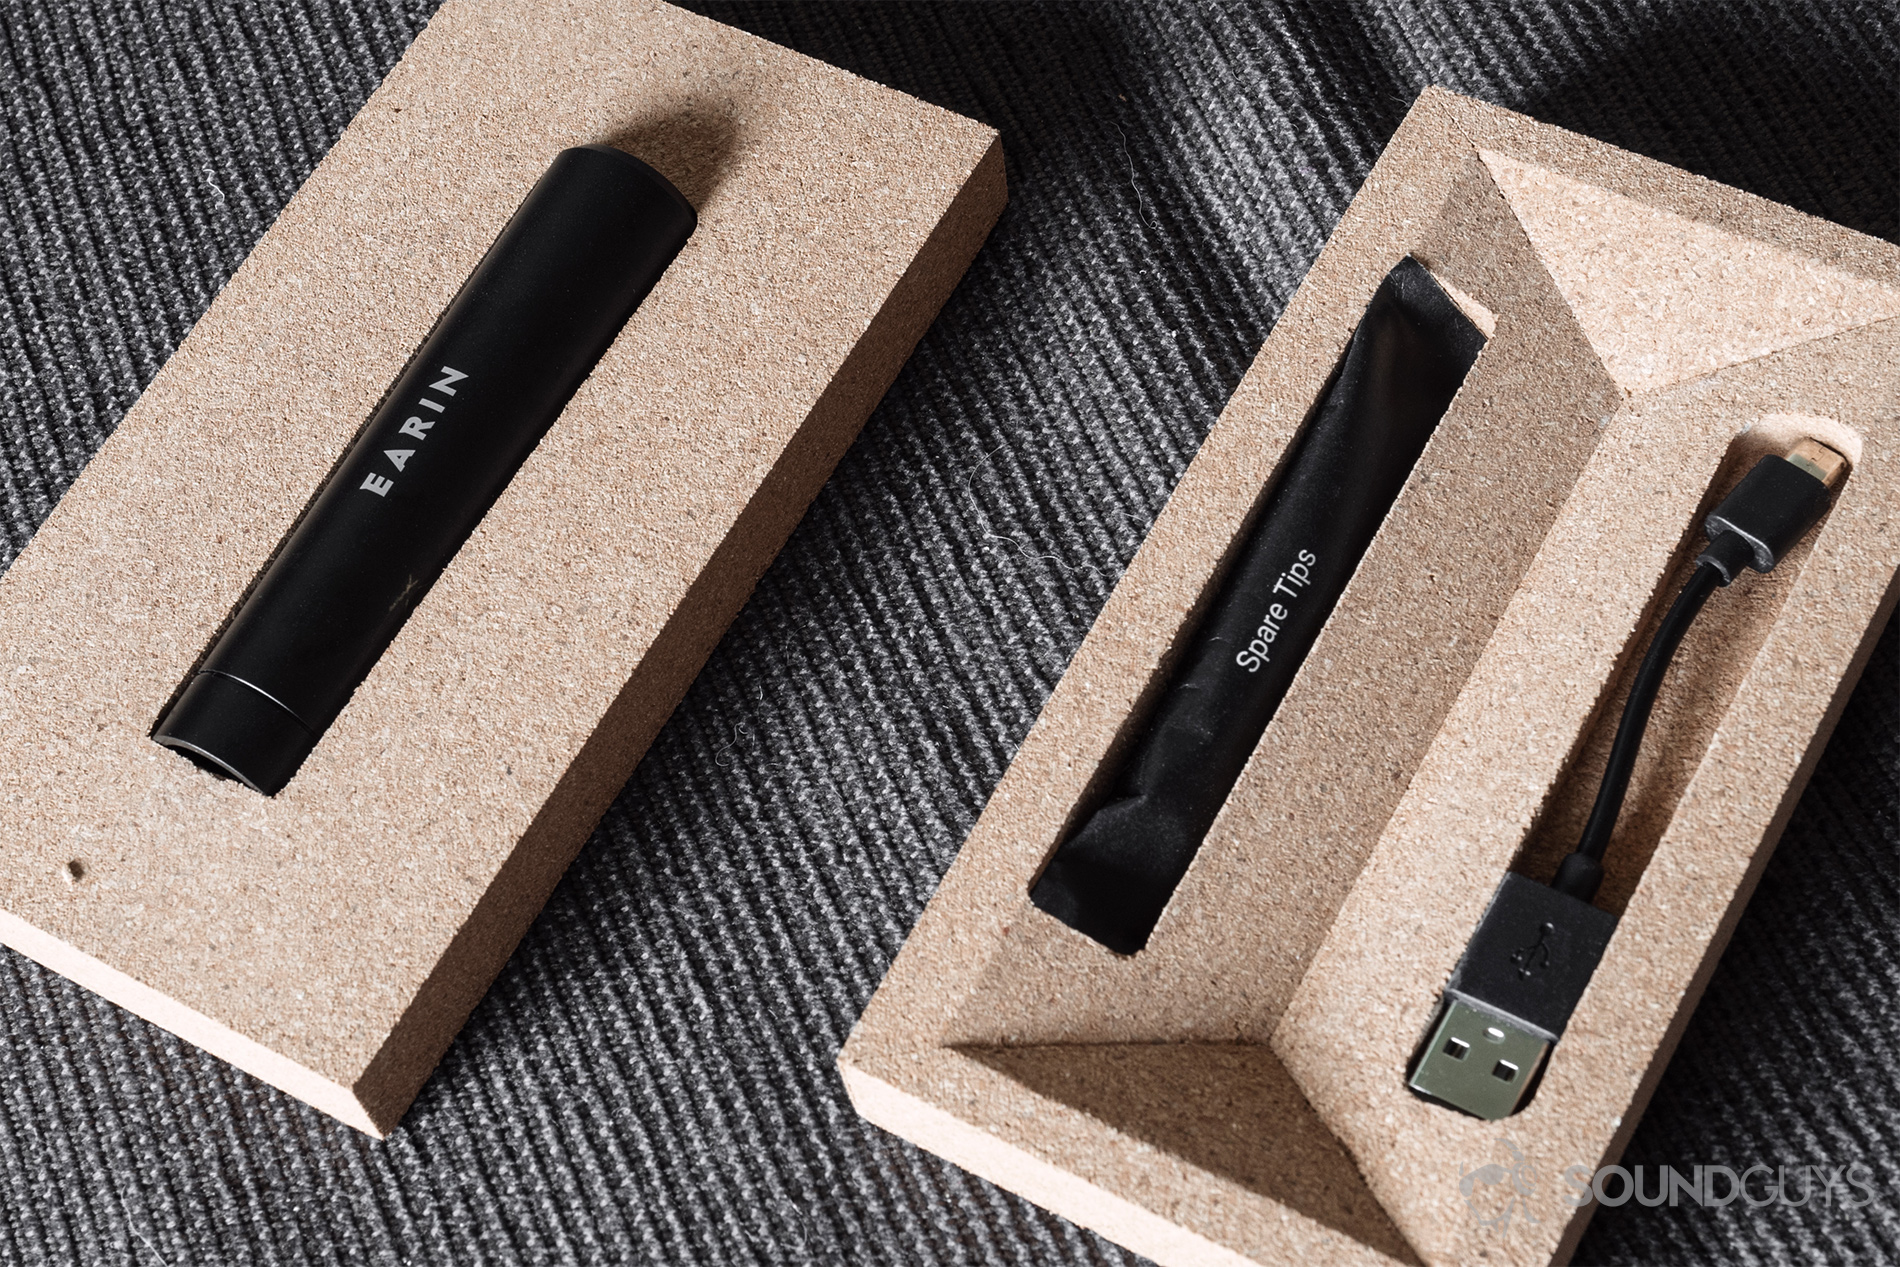 Earin M-2 review: The capsule, ear tips, and micro-usb cable in the cork packing.